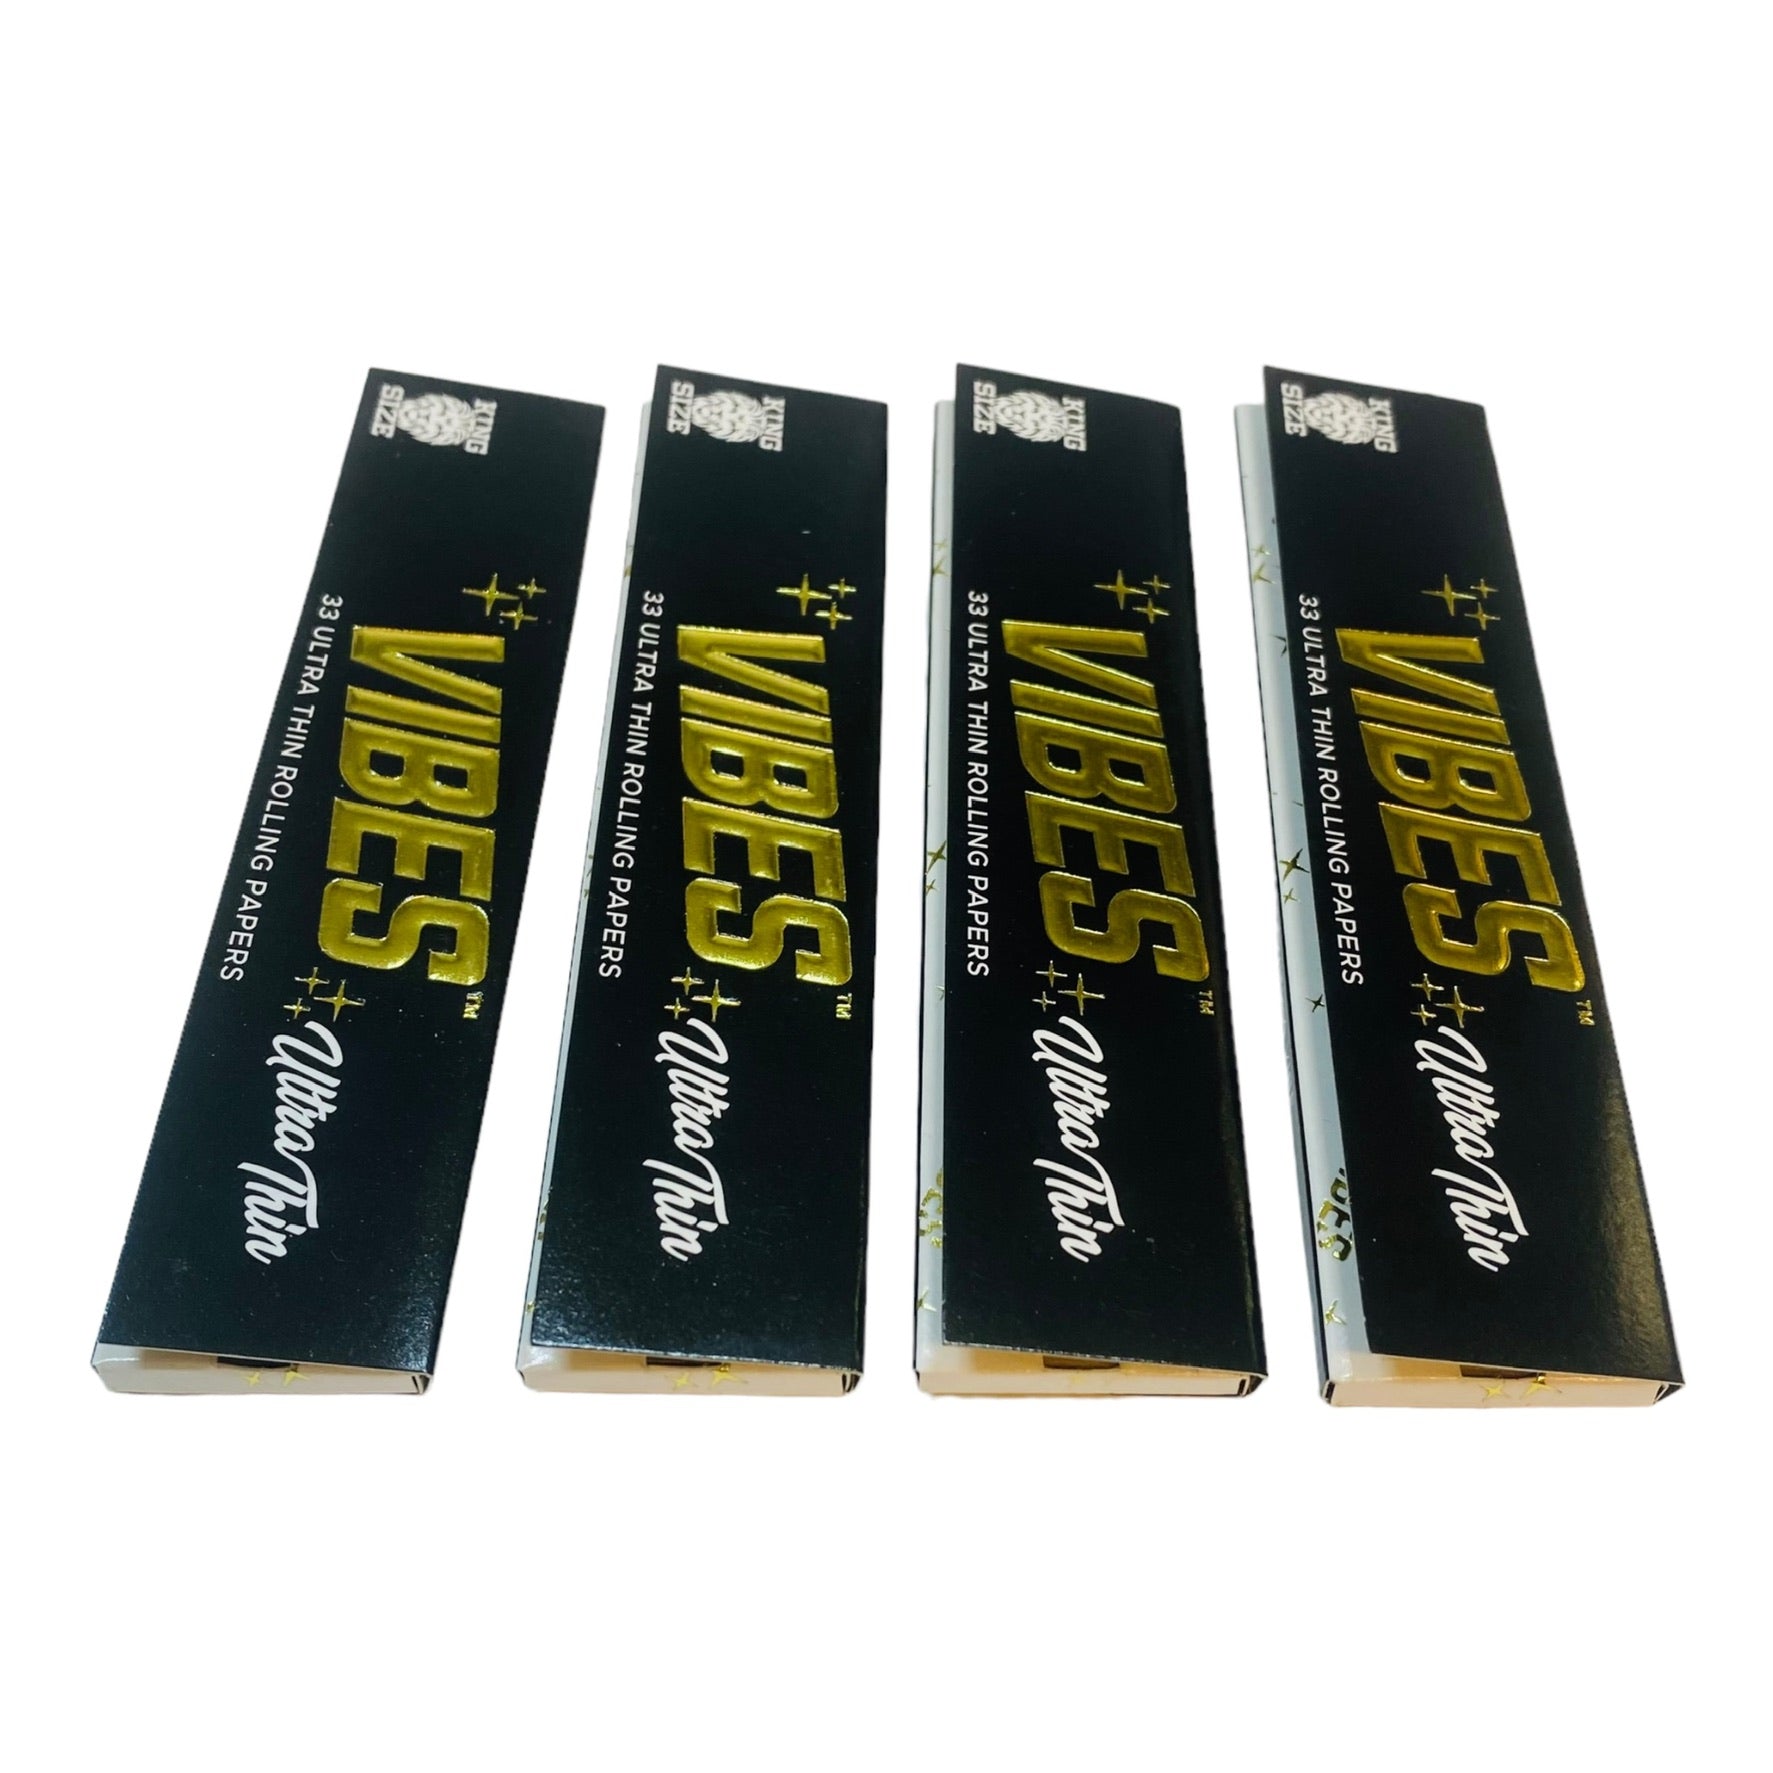 VIBES - Ultra Thin King Size Papers - 4 Packs